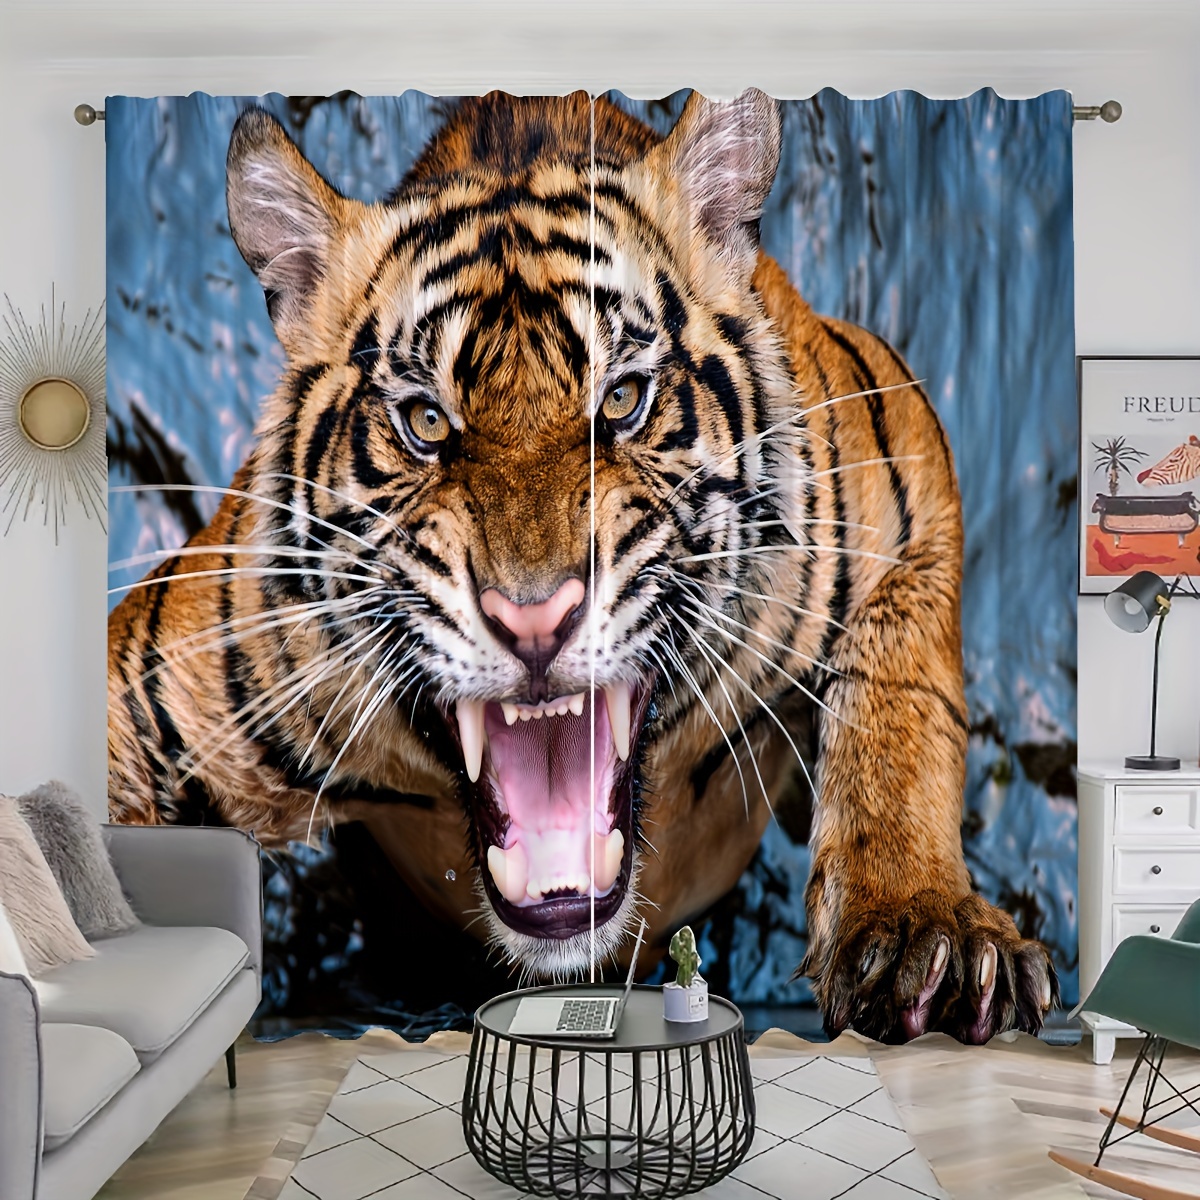 

2pcs Angry Tiger Print Curtains, Rod Pocket Curtain, Suitable For Restaurant Public Place Living Room Bedroom Office Study, Home Decor